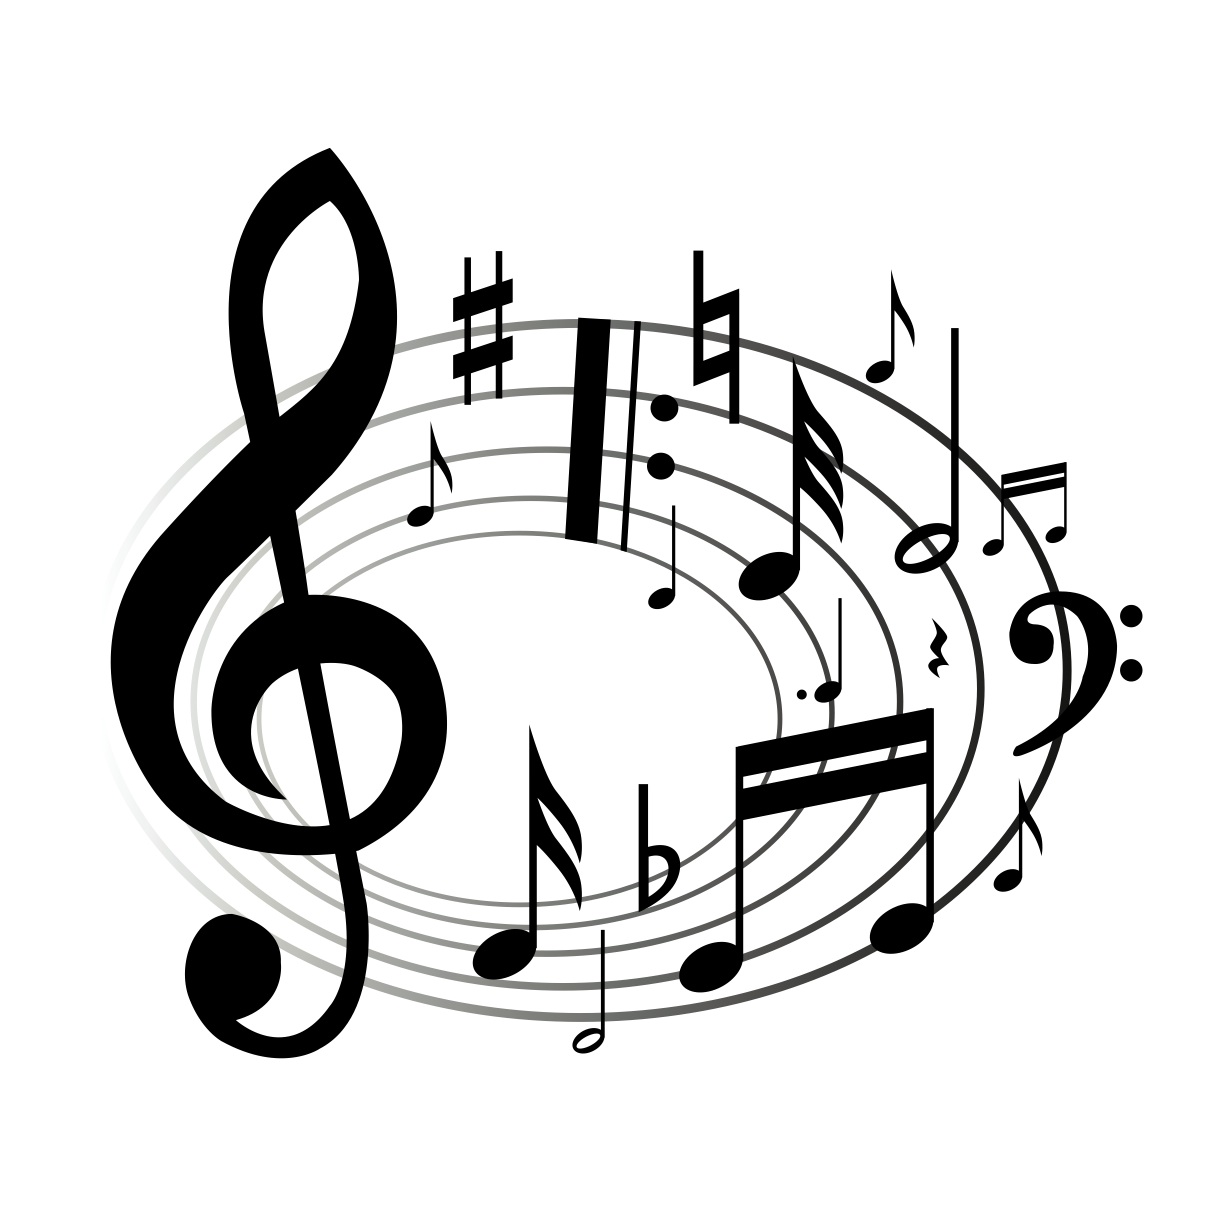 Music A L Instruments Clip Rt Clip Art In The Graphic Arts Refers To